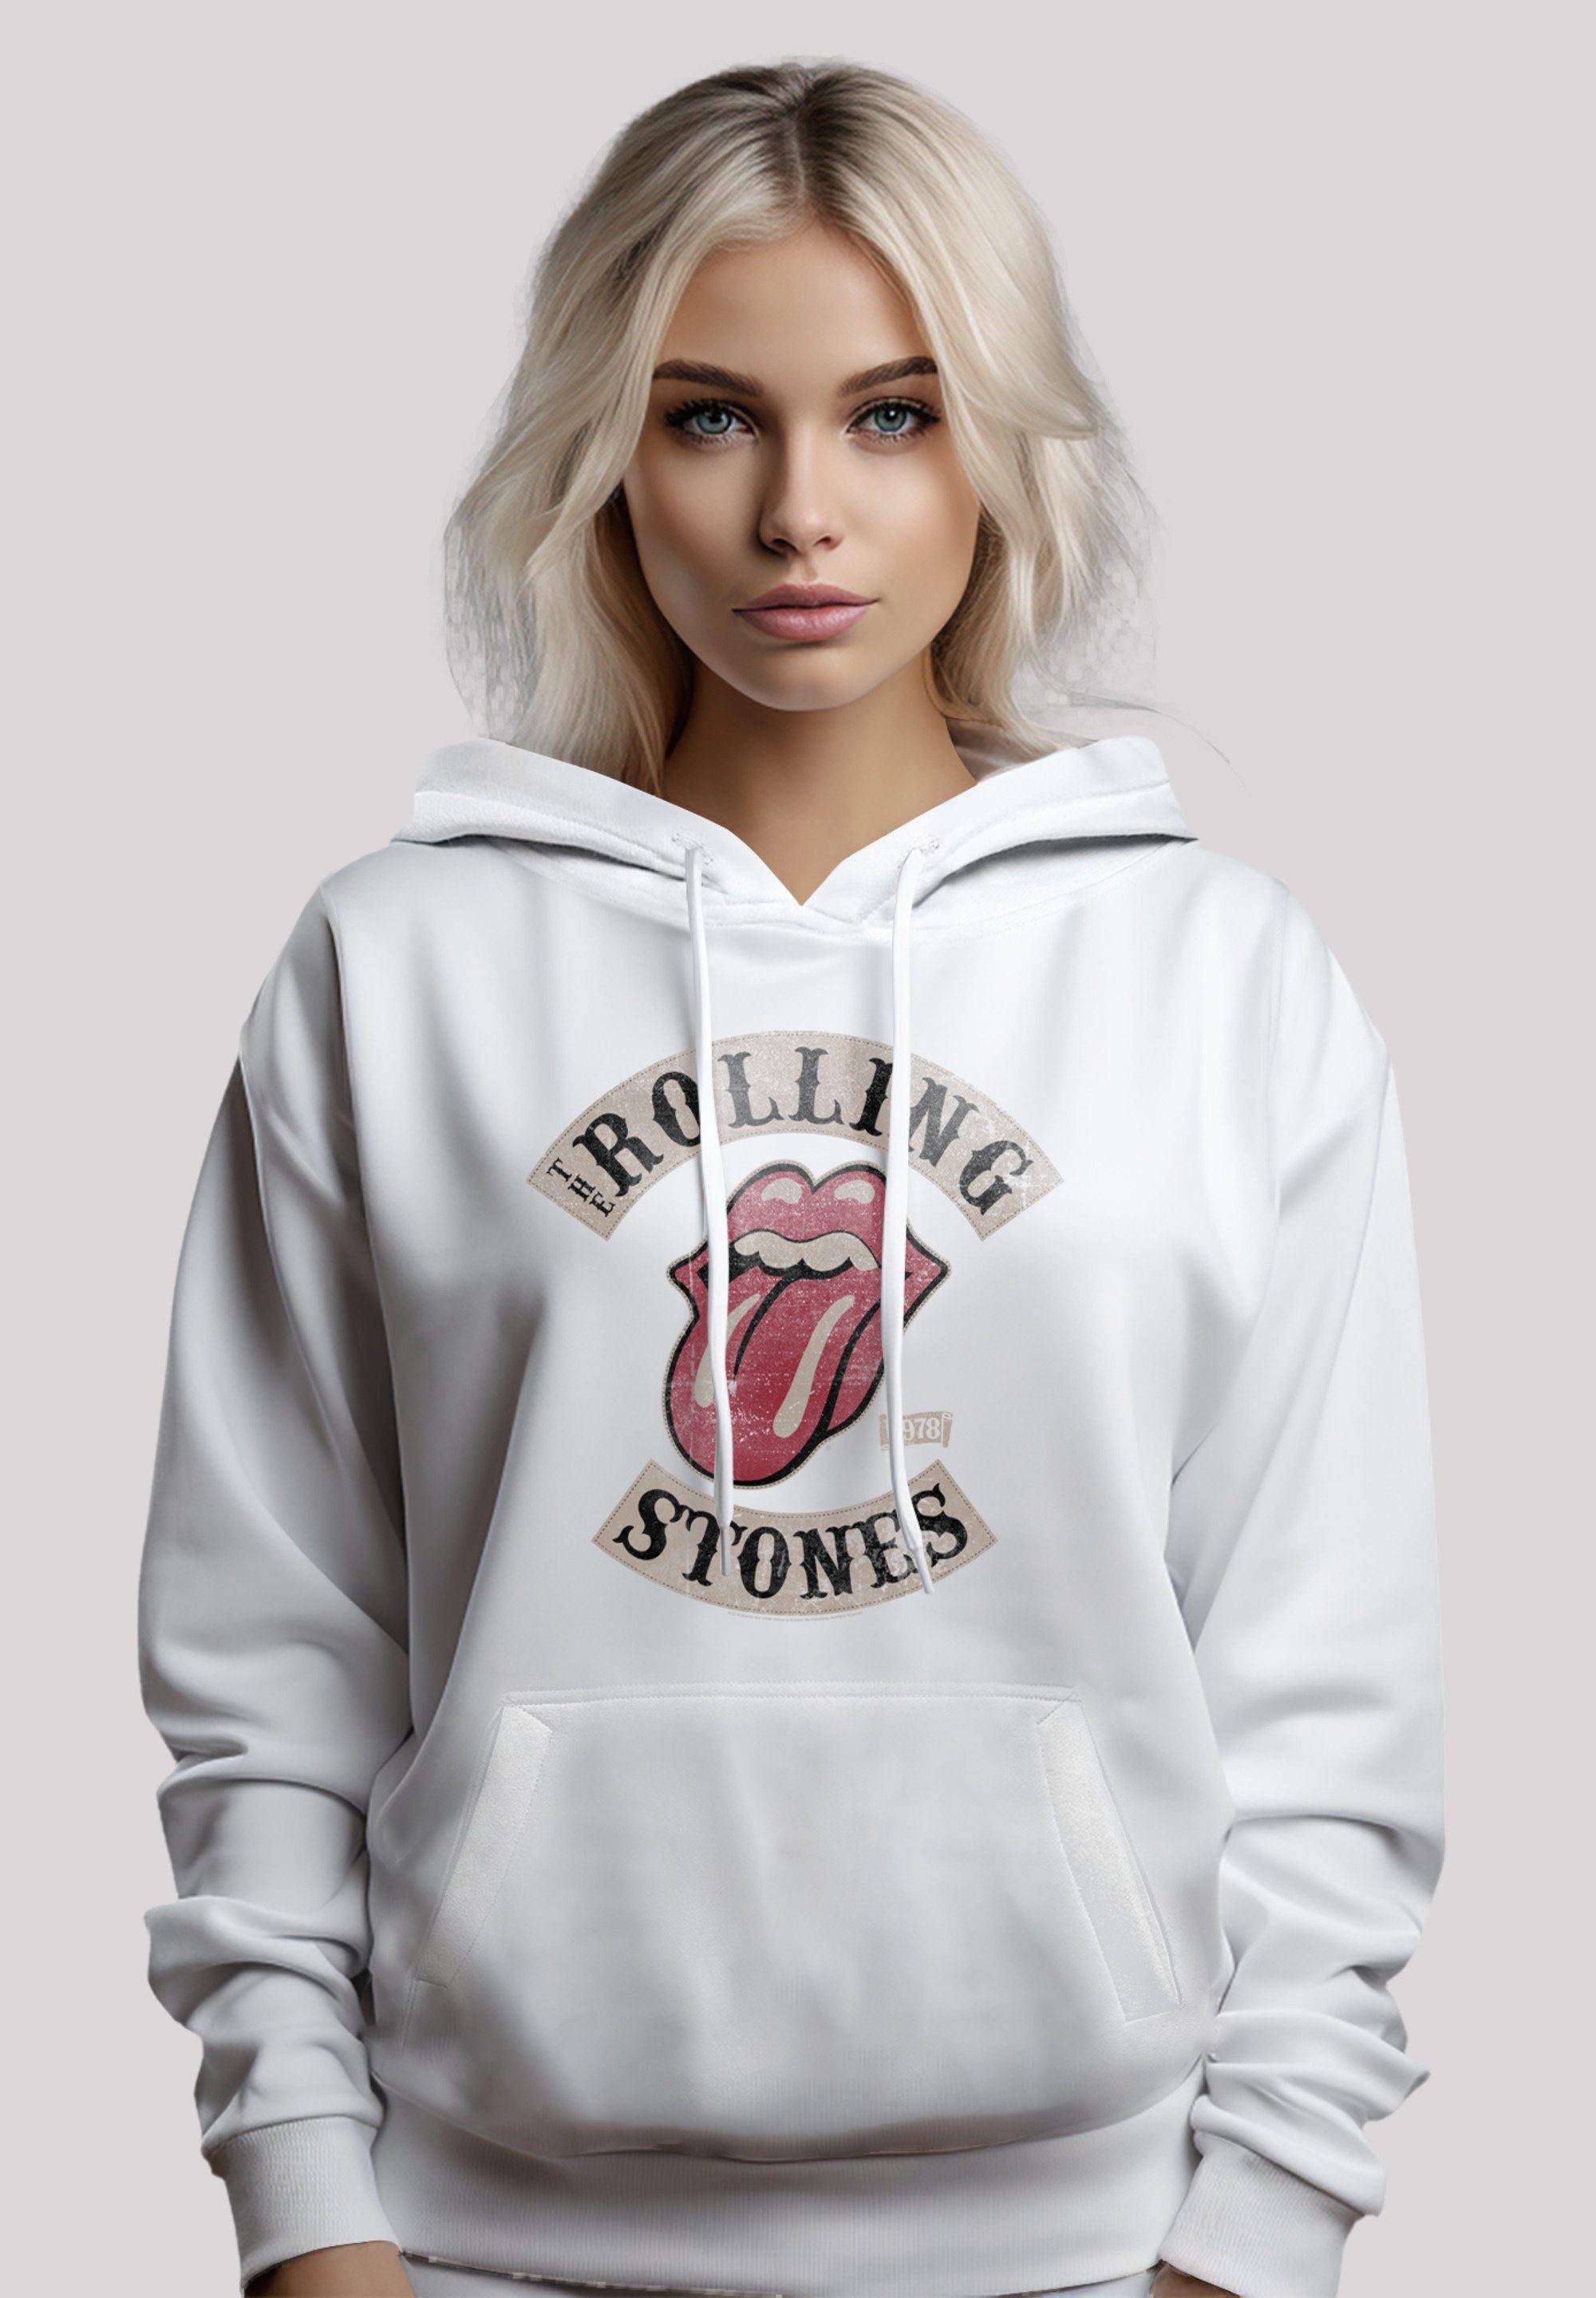 F4NT4STIC Kapuzenpullover The Rolling Stones Tour Rock Musik Band Hoodie, Warm, Bequem weiß